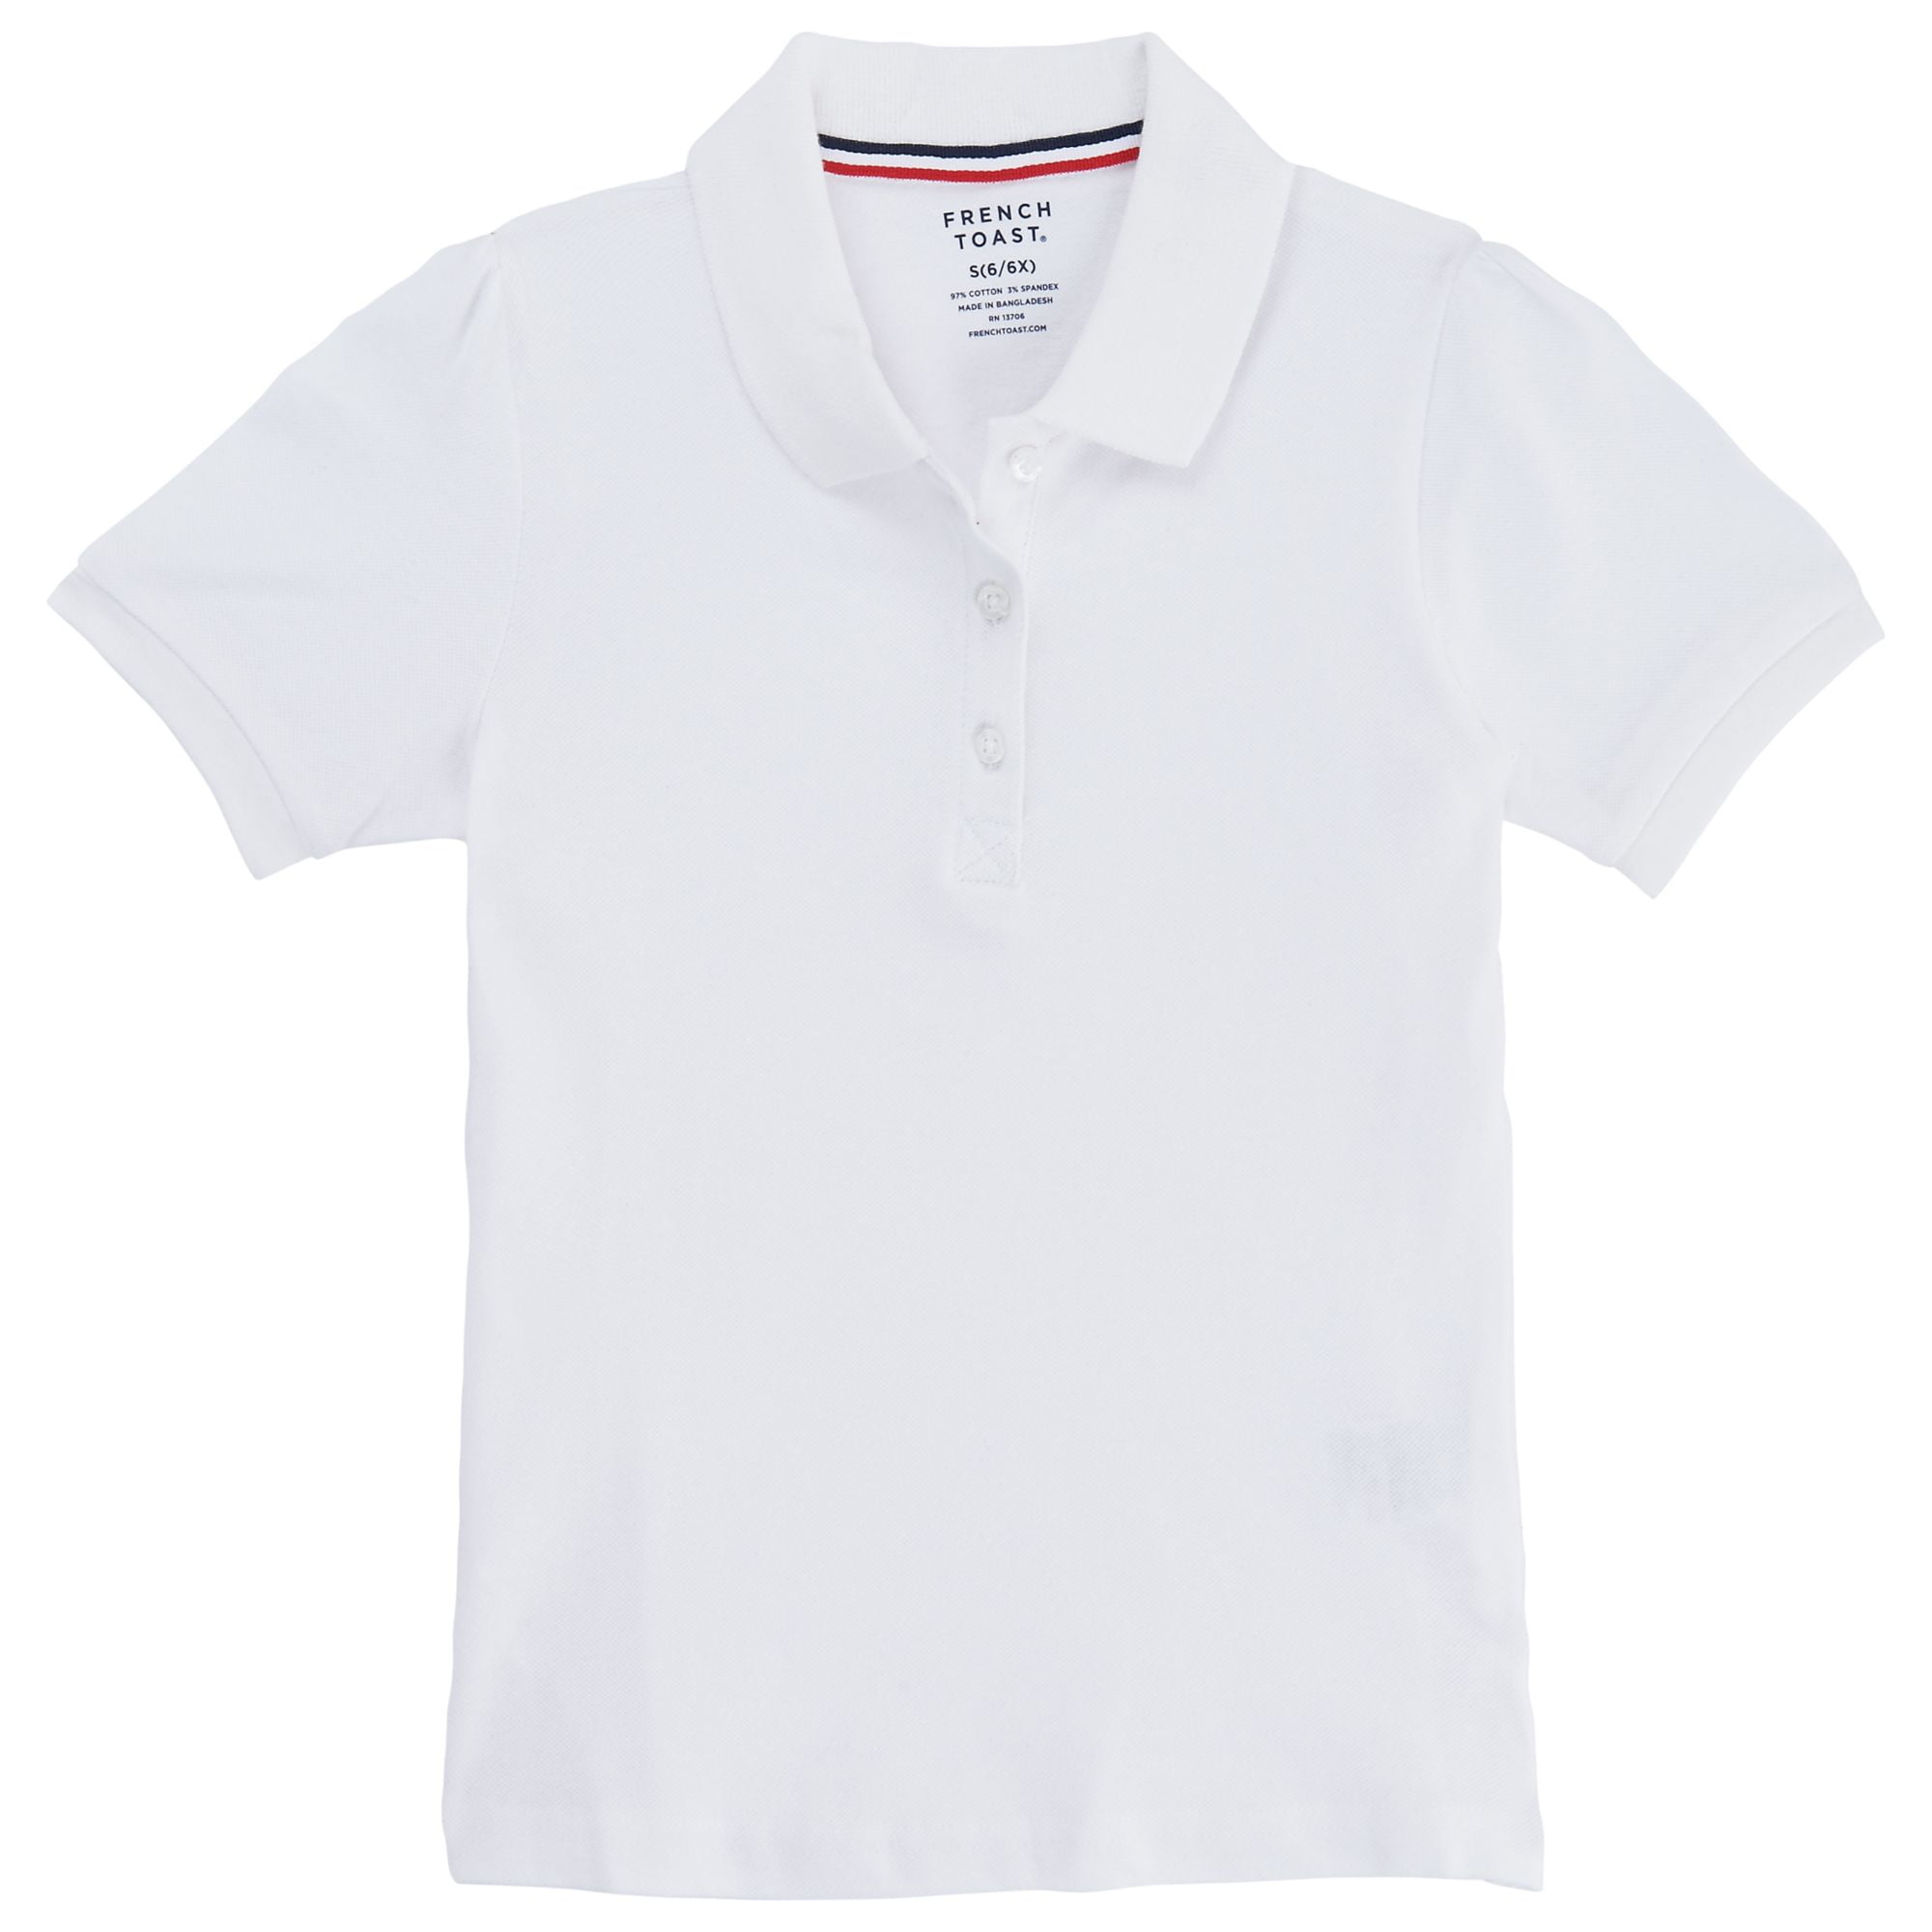 Standard & Plus French Toast Girls Short Sleeve Stretch Pique Polo Shirt 